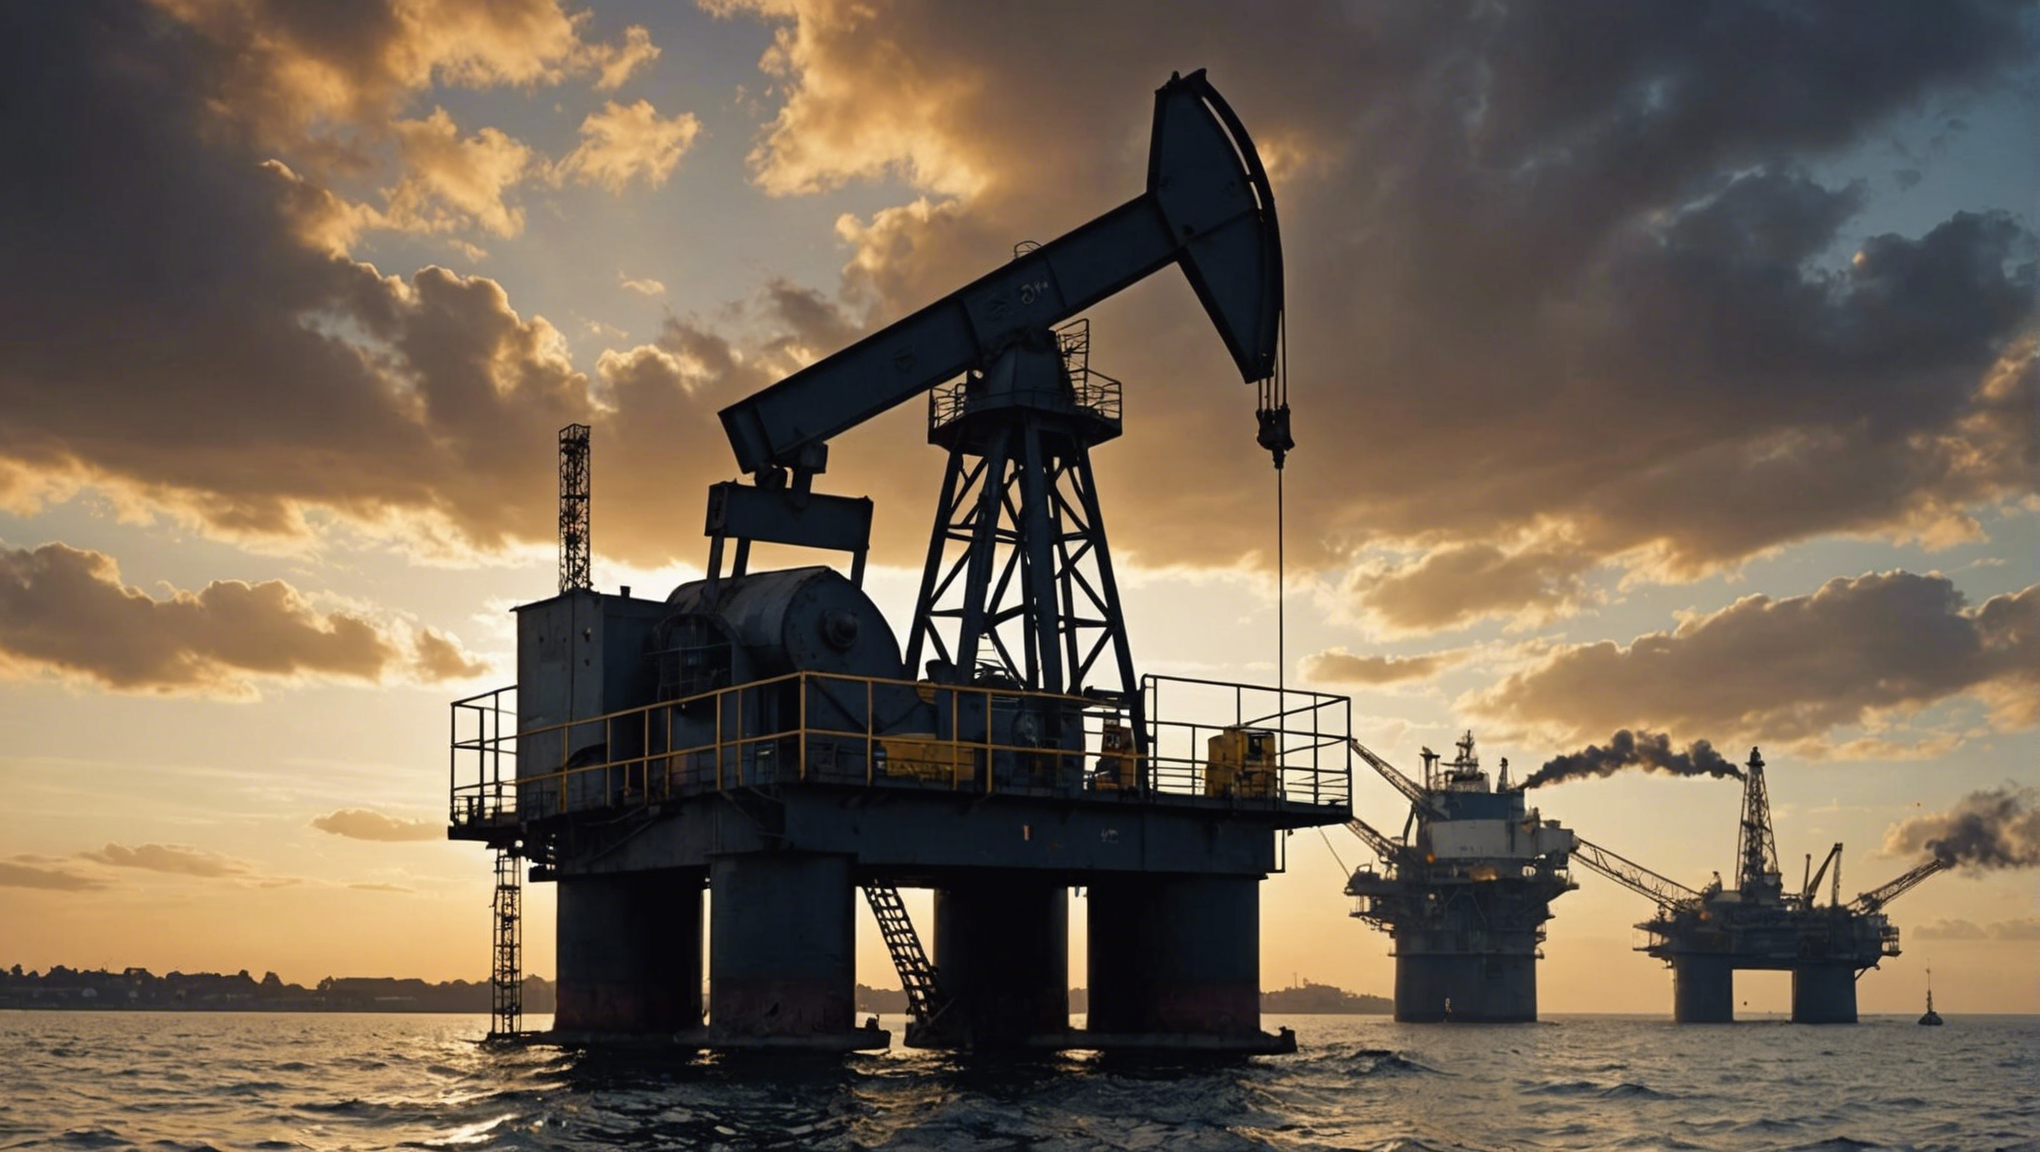 explore the enduring symbolism of oil as a representation of power and prosperity and its impact on economies and geopolitical dynamics. learn why oil remains a symbol of influence and wealth in today's global landscape.